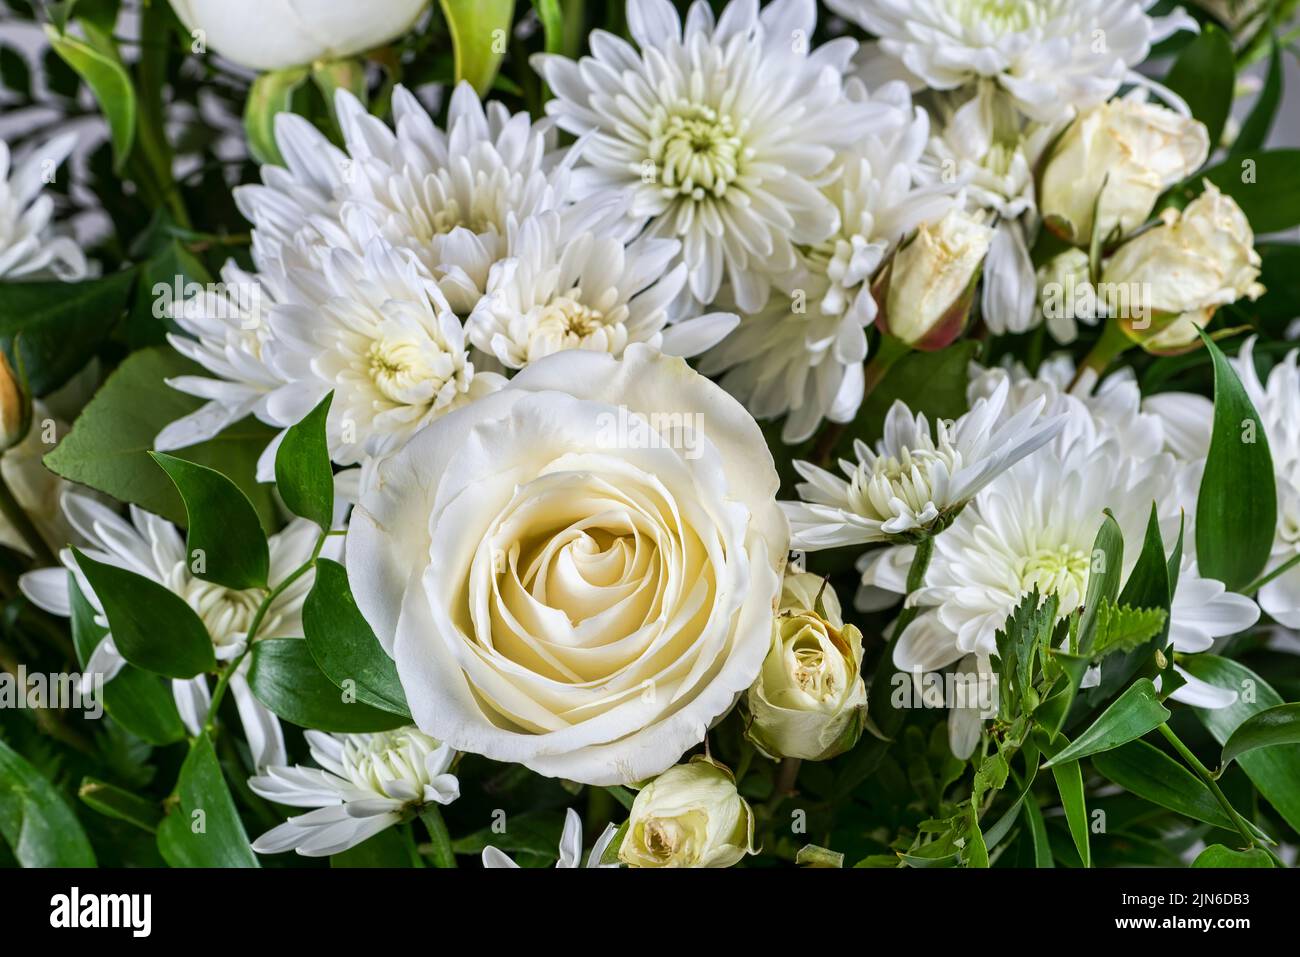 White flower and dark green leaves in bright floral arrangement Stock Photo